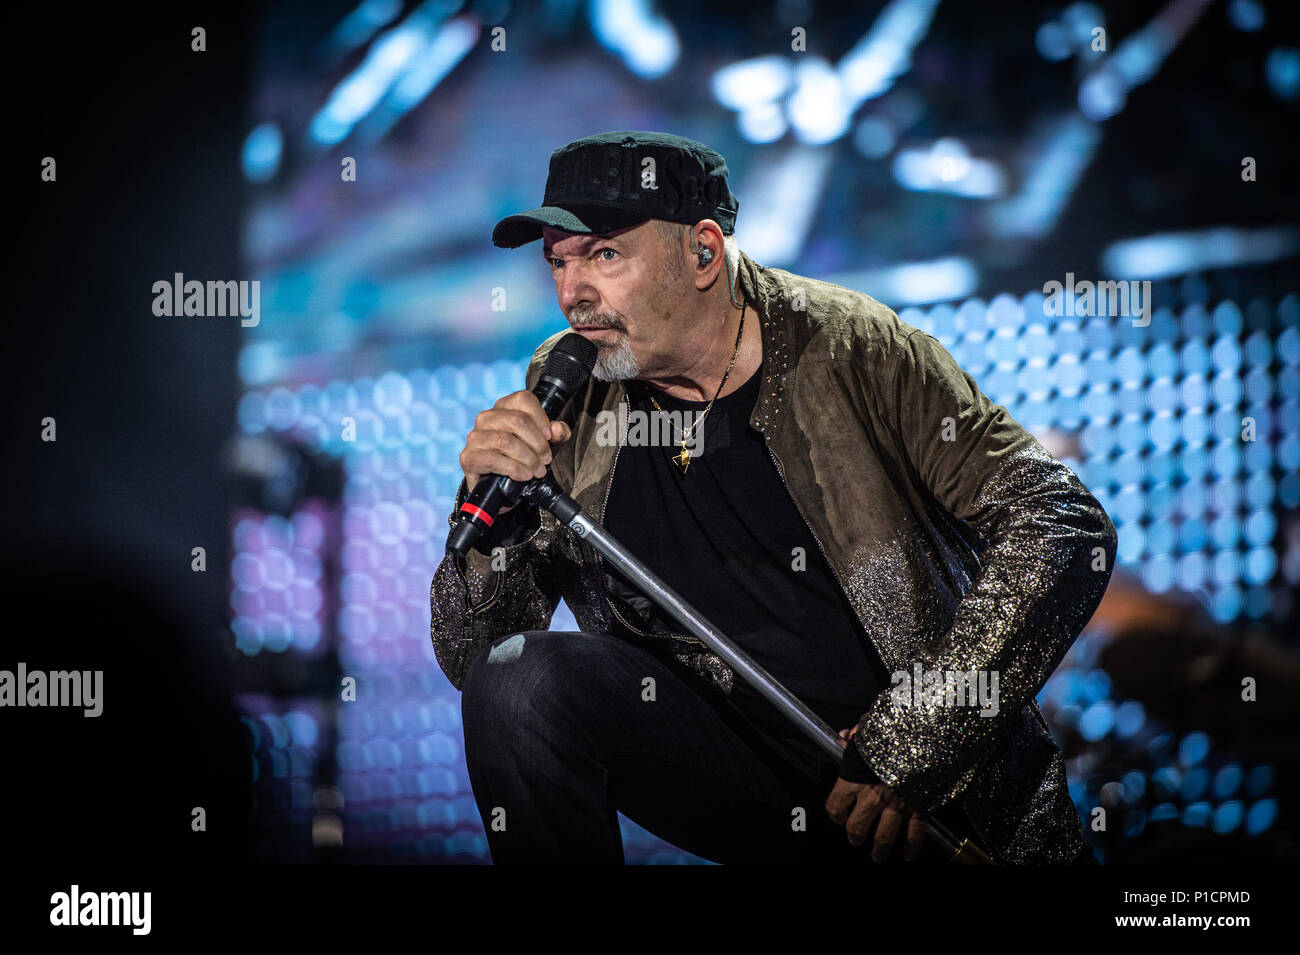 Vasco Rossi High Resolution Stock Photography and Images - Alamy